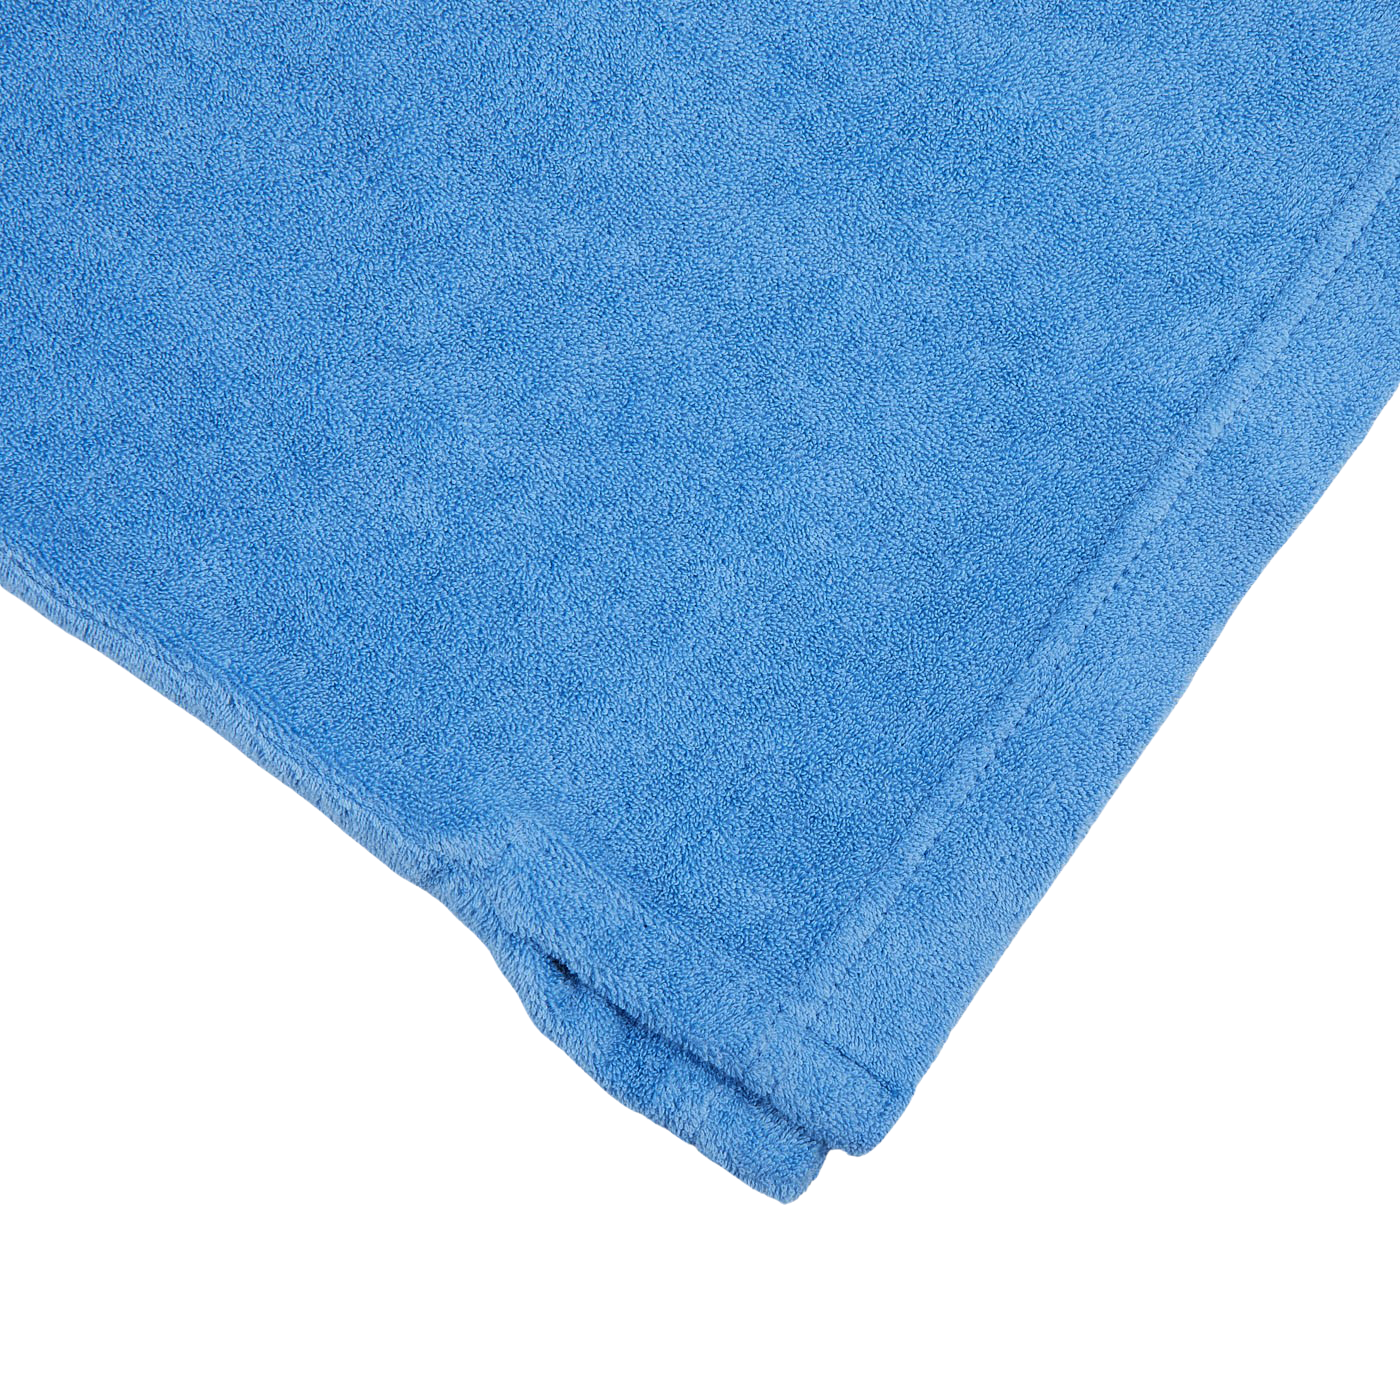 A Fedeli Bright Blue Cotton Towelling Polo Shirt folded on top of a white surface.